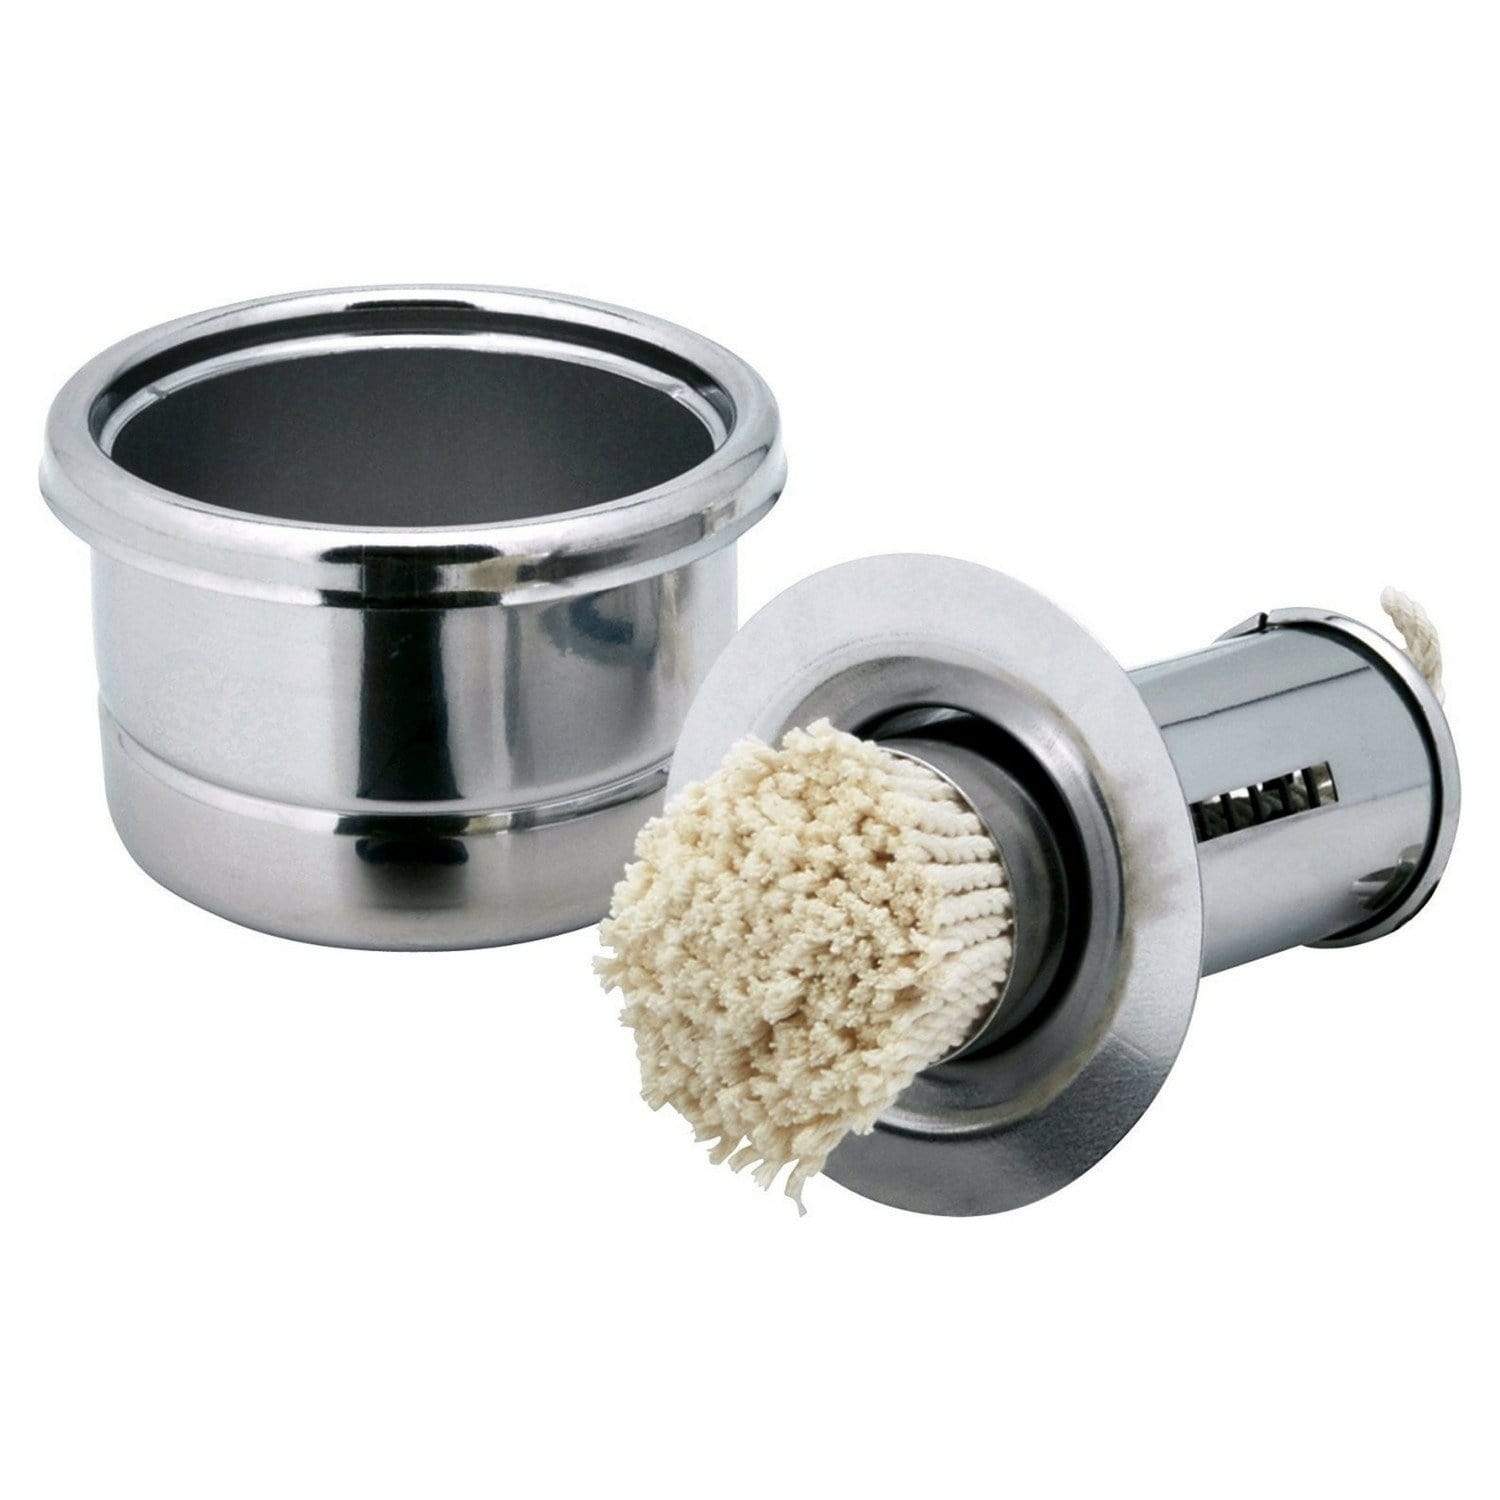 https://www.globalkitchenjapan.com/cdn/shop/products/ichibishi-stainless-steel-takoyaki-basting-mop-oil-dispenser-with-removable-cotton-head-small-basting-mops-23271518351_1600x.jpg?v=1564104974